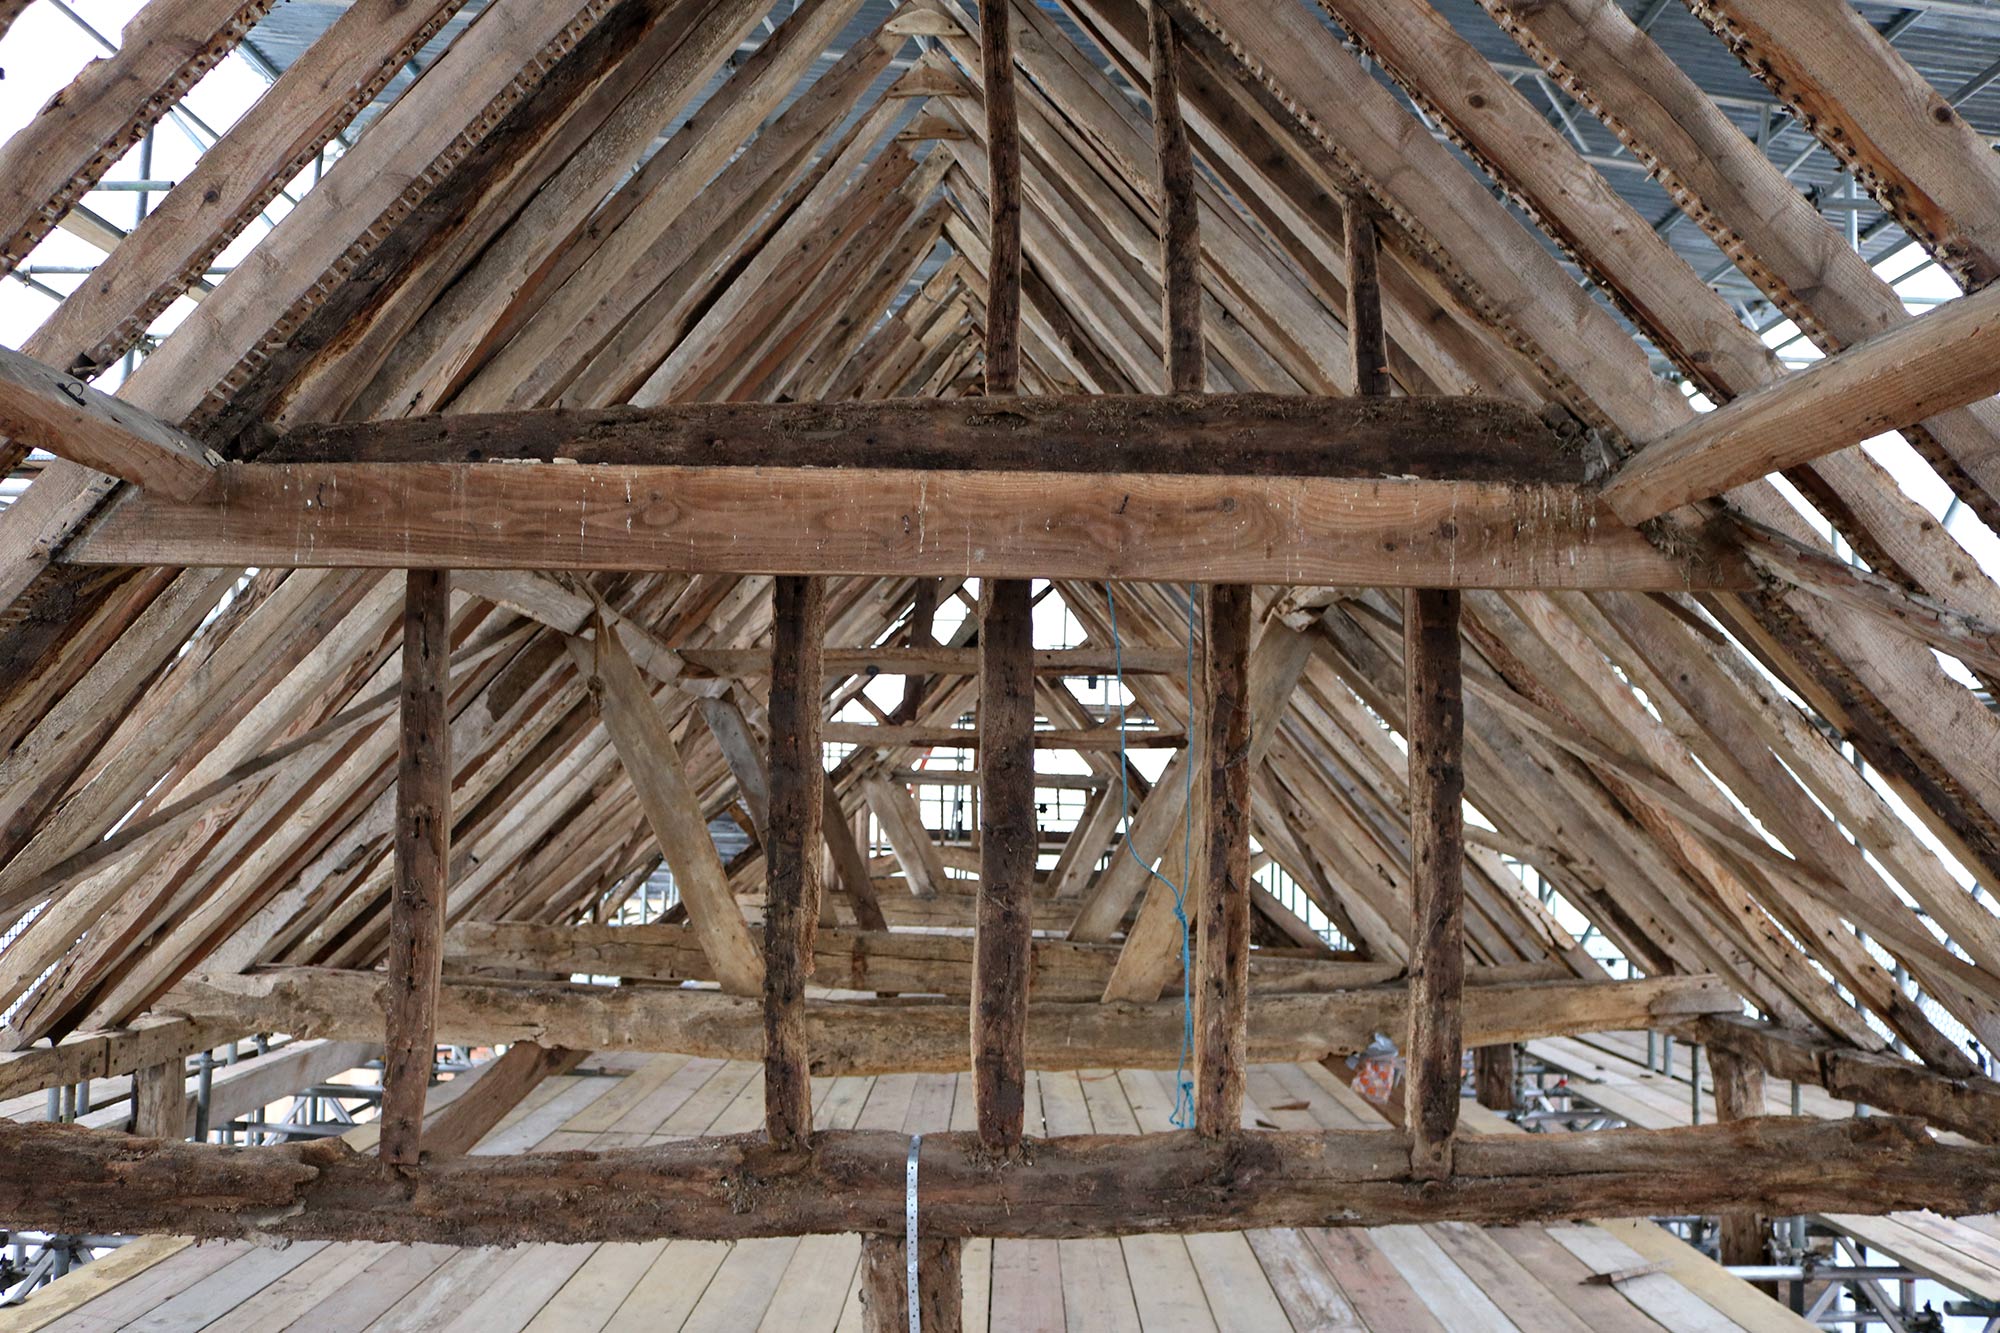 The timber roof trusses before restoration